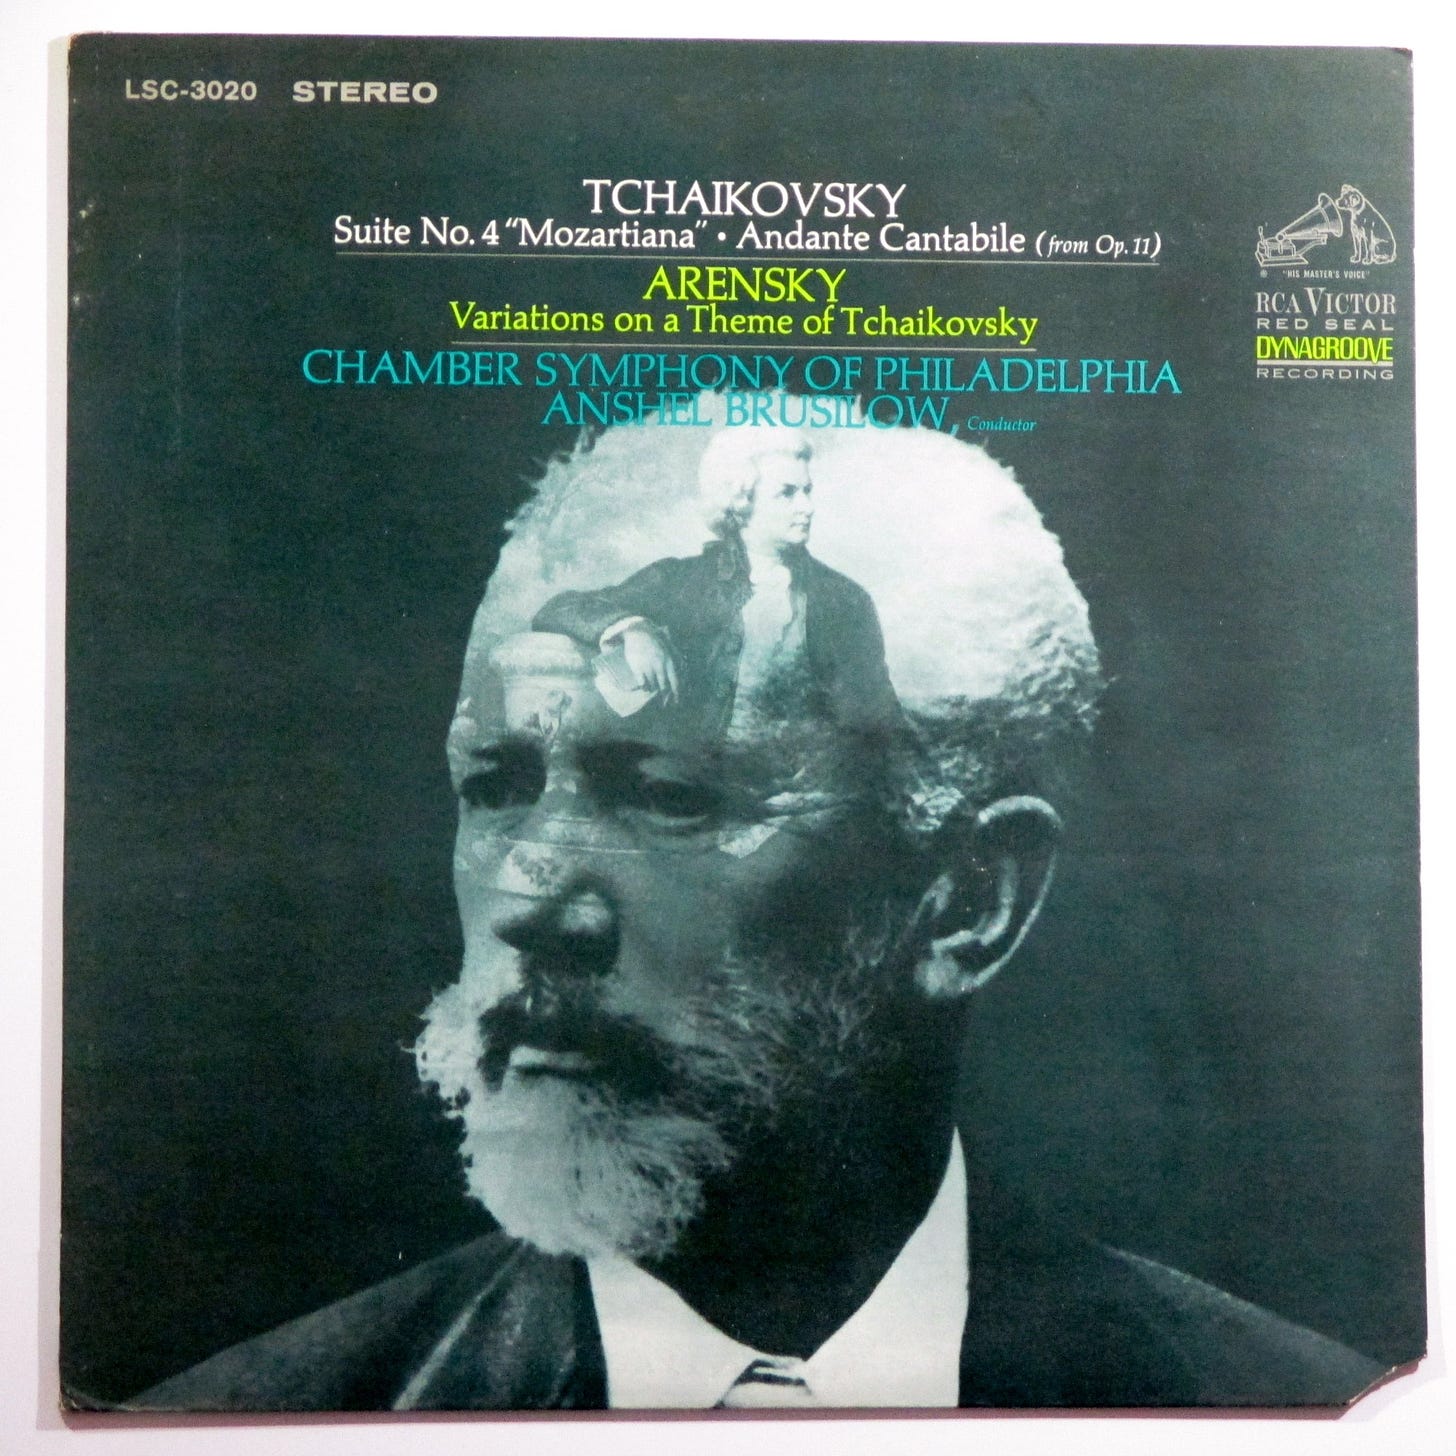 Tchaikovsky Suite No. 4 “Mozartiana” / Andante Cantabile (from Op. 11)  Arensky: Variations on a Theme of Tchaikovsky / Anshel Brusilow, Conductor  / ...